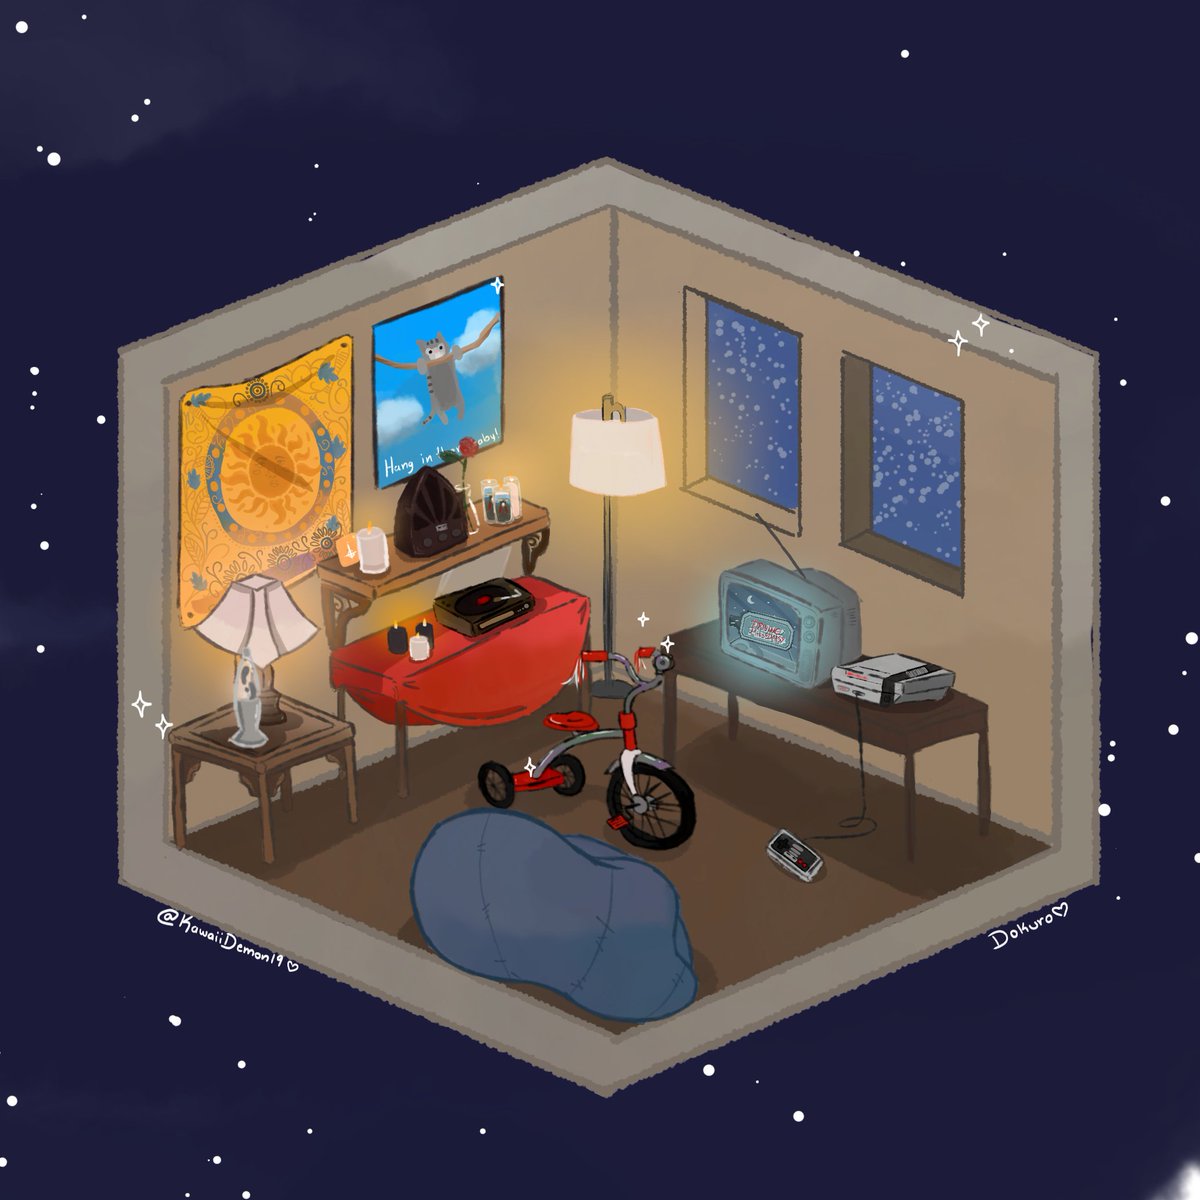 A safe place ❤️‍🩹
A place where you can rest or have a good time.

A mini version of Copia's room 🖤✨️
#art #digitalart #theghostband #cozyart #isometric #ghostfanart #ghosttwt #papaemeritus #cardinalcopia